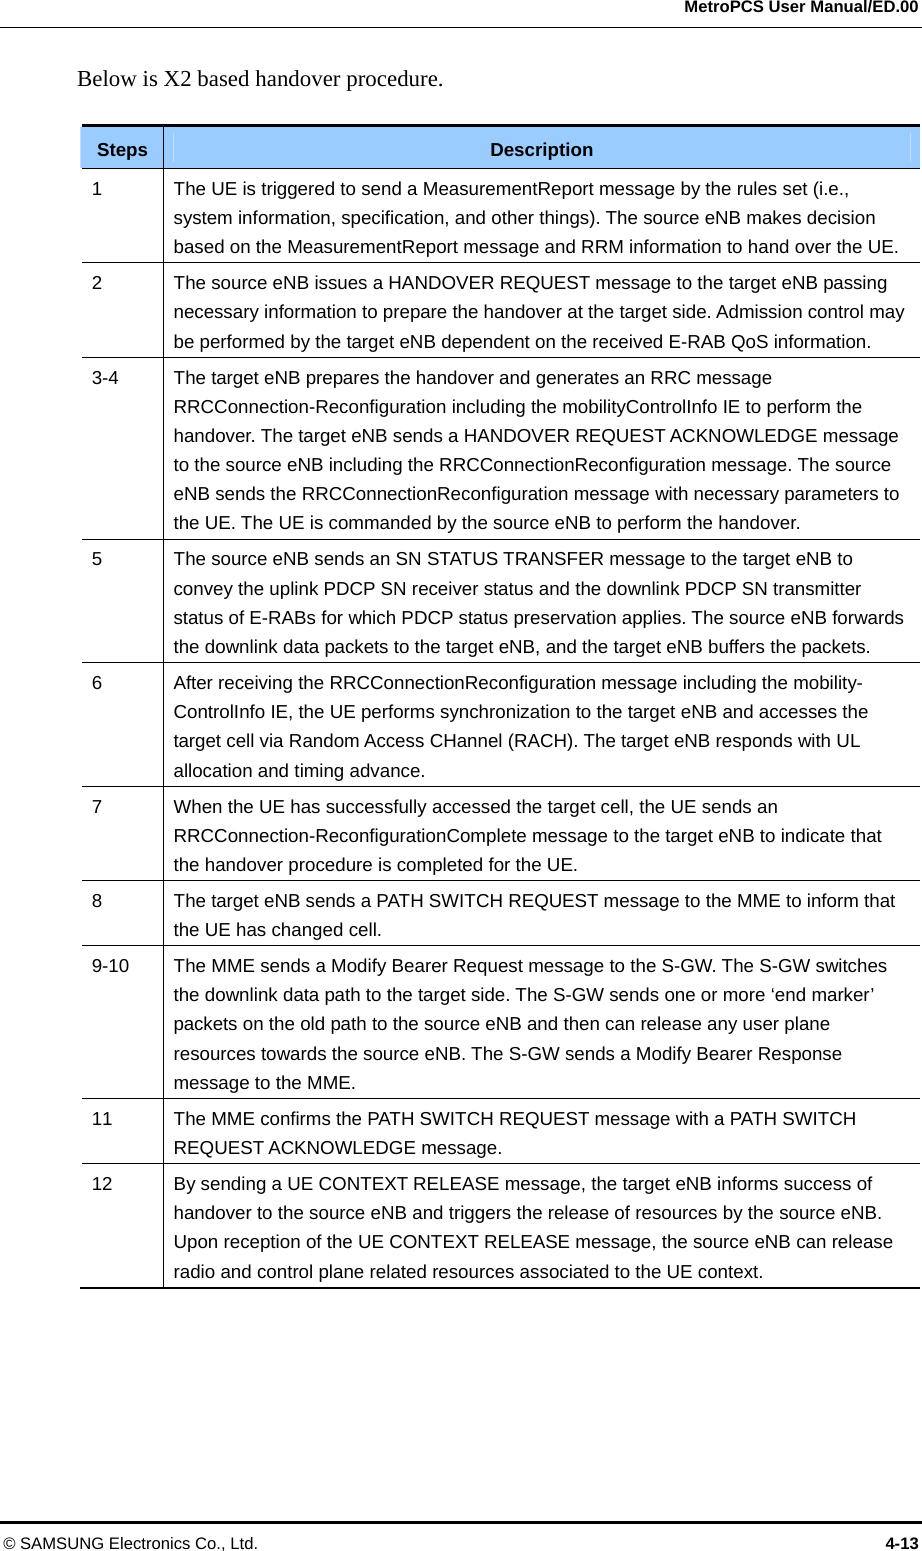  MetroPCS User Manual/ED.00 © SAMSUNG Electronics Co., Ltd.  4-13 Below is X2 based handover procedure.  Steps  Description 1  The UE is triggered to send a MeasurementReport message by the rules set (i.e., system information, specification, and other things). The source eNB makes decision based on the MeasurementReport message and RRM information to hand over the UE. 2  The source eNB issues a HANDOVER REQUEST message to the target eNB passing necessary information to prepare the handover at the target side. Admission control may be performed by the target eNB dependent on the received E-RAB QoS information. 3-4  The target eNB prepares the handover and generates an RRC message RRCConnection-Reconfiguration including the mobilityControlInfo IE to perform the handover. The target eNB sends a HANDOVER REQUEST ACKNOWLEDGE message to the source eNB including the RRCConnectionReconfiguration message. The source eNB sends the RRCConnectionReconfiguration message with necessary parameters to the UE. The UE is commanded by the source eNB to perform the handover. 5  The source eNB sends an SN STATUS TRANSFER message to the target eNB to convey the uplink PDCP SN receiver status and the downlink PDCP SN transmitter status of E-RABs for which PDCP status preservation applies. The source eNB forwards the downlink data packets to the target eNB, and the target eNB buffers the packets. 6  After receiving the RRCConnectionReconfiguration message including the mobility-ControlInfo IE, the UE performs synchronization to the target eNB and accesses the target cell via Random Access CHannel (RACH). The target eNB responds with UL allocation and timing advance. 7  When the UE has successfully accessed the target cell, the UE sends an RRCConnection-ReconfigurationComplete message to the target eNB to indicate that the handover procedure is completed for the UE. 8  The target eNB sends a PATH SWITCH REQUEST message to the MME to inform that the UE has changed cell. 9-10  The MME sends a Modify Bearer Request message to the S-GW. The S-GW switches the downlink data path to the target side. The S-GW sends one or more ‘end marker’ packets on the old path to the source eNB and then can release any user plane resources towards the source eNB. The S-GW sends a Modify Bearer Response message to the MME. 11  The MME confirms the PATH SWITCH REQUEST message with a PATH SWITCH REQUEST ACKNOWLEDGE message. 12  By sending a UE CONTEXT RELEASE message, the target eNB informs success of handover to the source eNB and triggers the release of resources by the source eNB. Upon reception of the UE CONTEXT RELEASE message, the source eNB can release radio and control plane related resources associated to the UE context.  